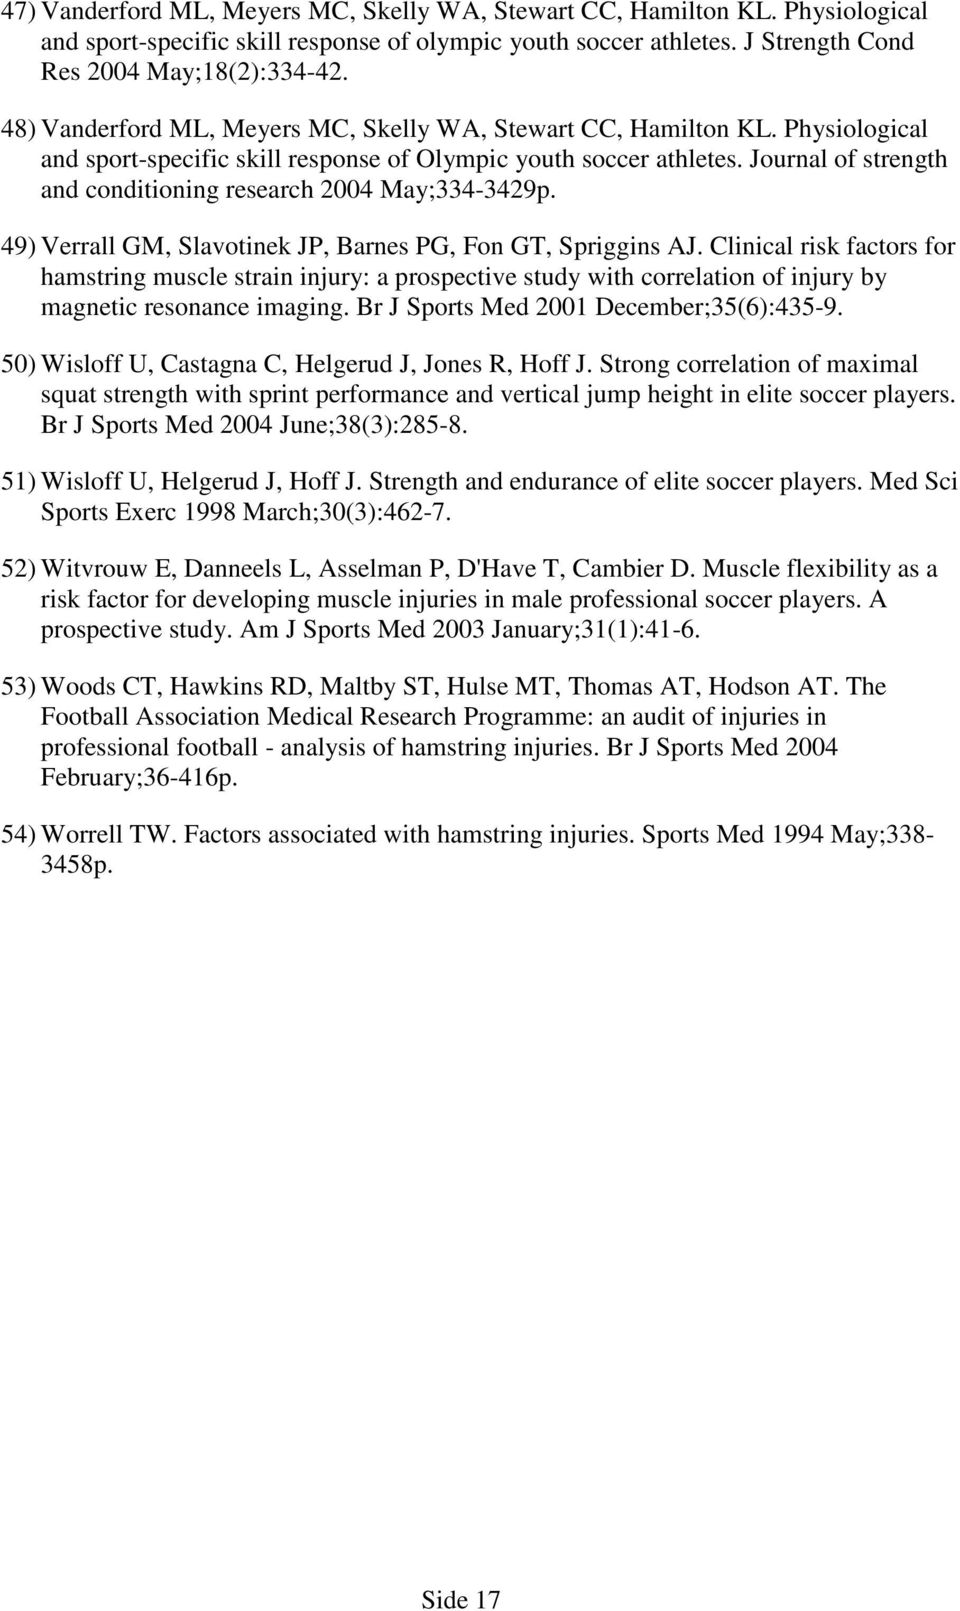 Journal of strength and conditioning research 2004 May;334-3429p. 49) Verrall GM, Slavotinek JP, Barnes PG, Fon GT, Spriggins AJ.